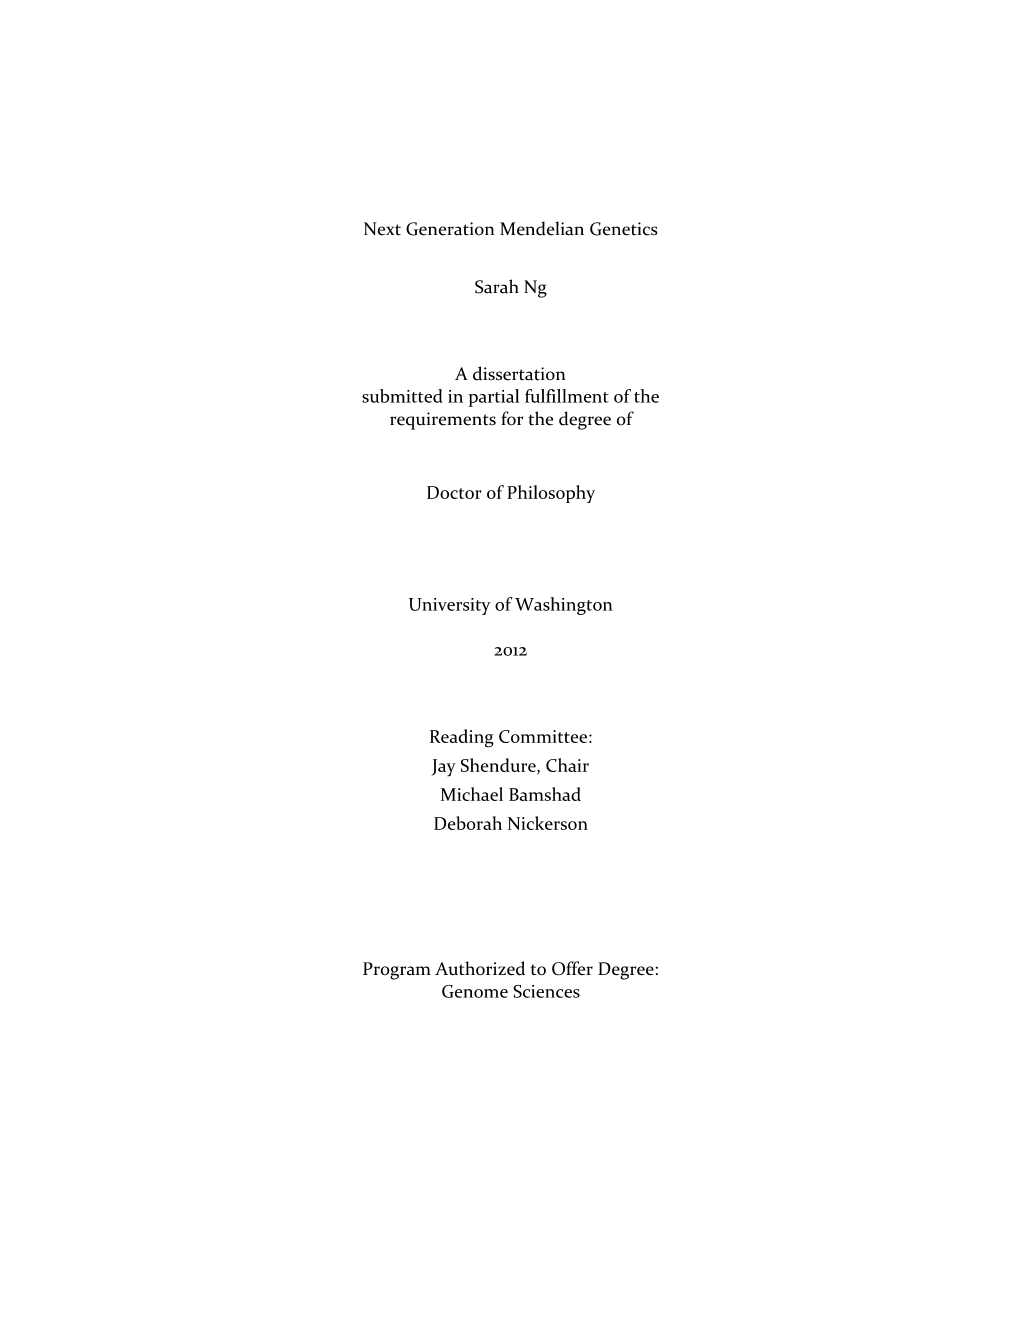 Next Generation Mendelian Genetics Sarah Ng a Dissertation Submitted